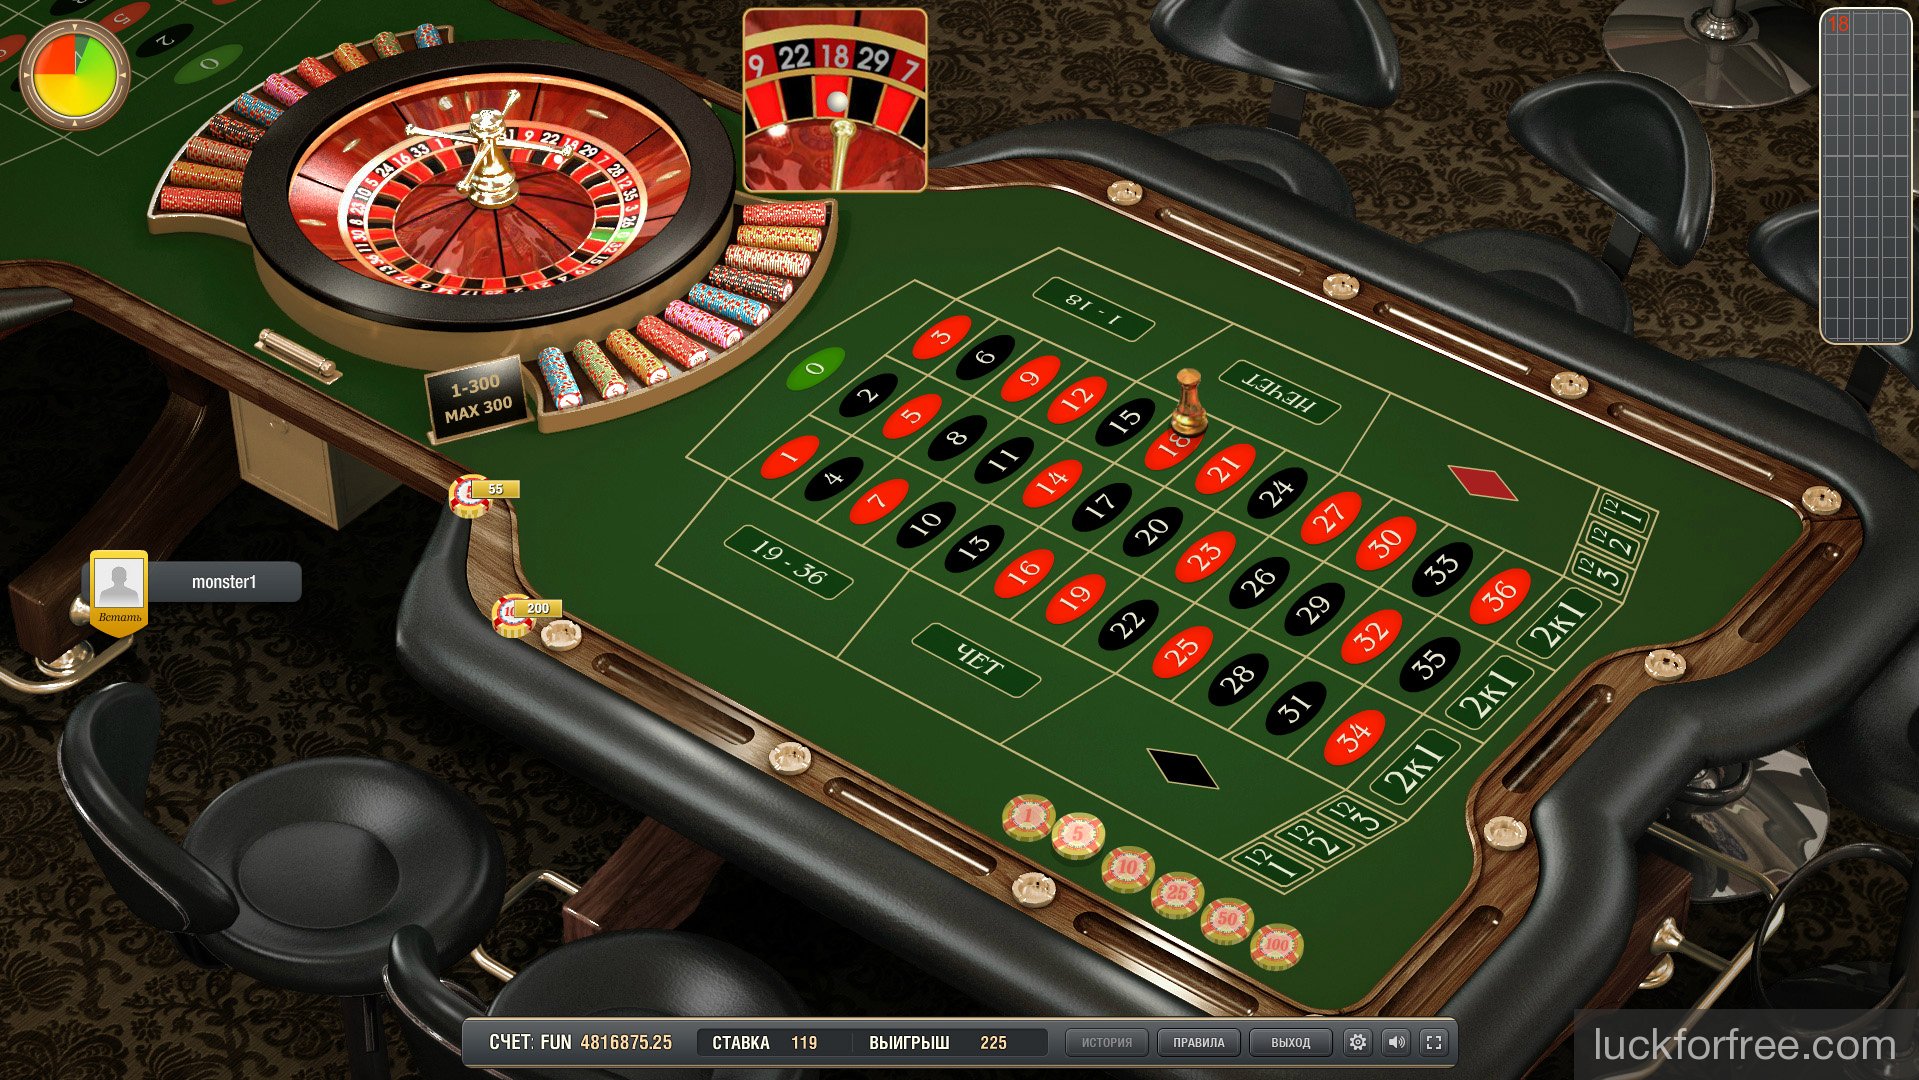 Once upon a time casino online mexico